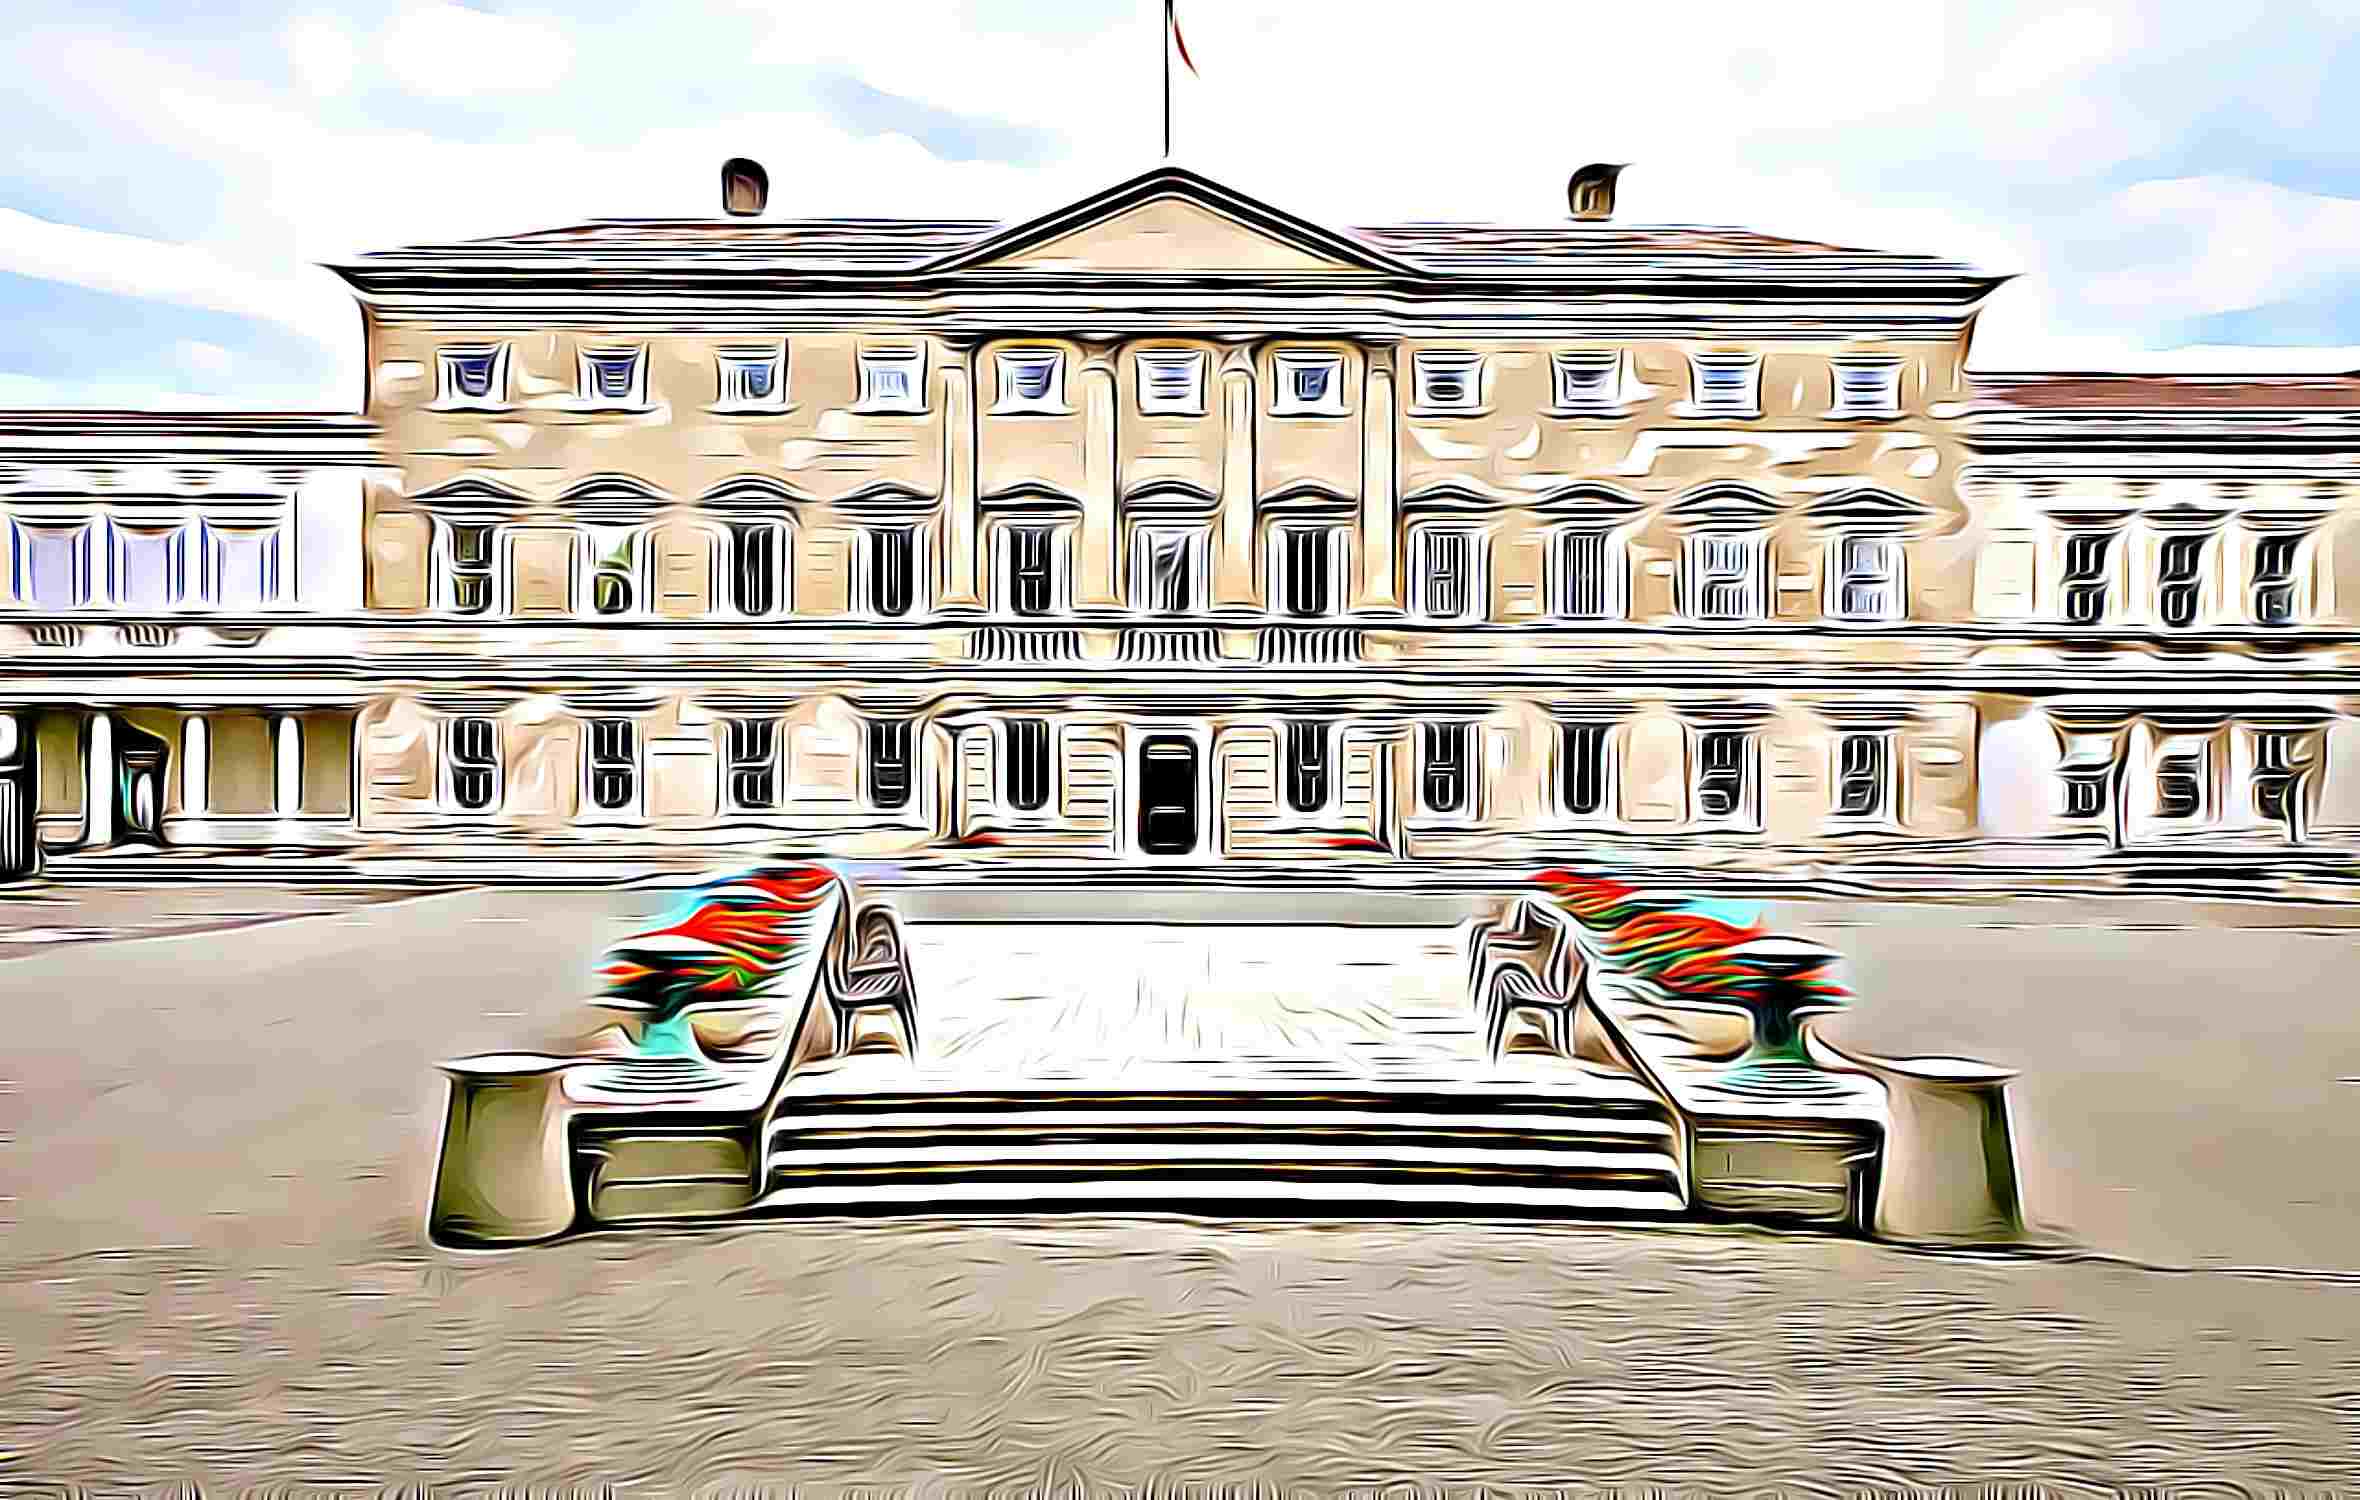 A photo of the facade of Leinster House rendered via a filter to appear hand-drawn with pastel colours